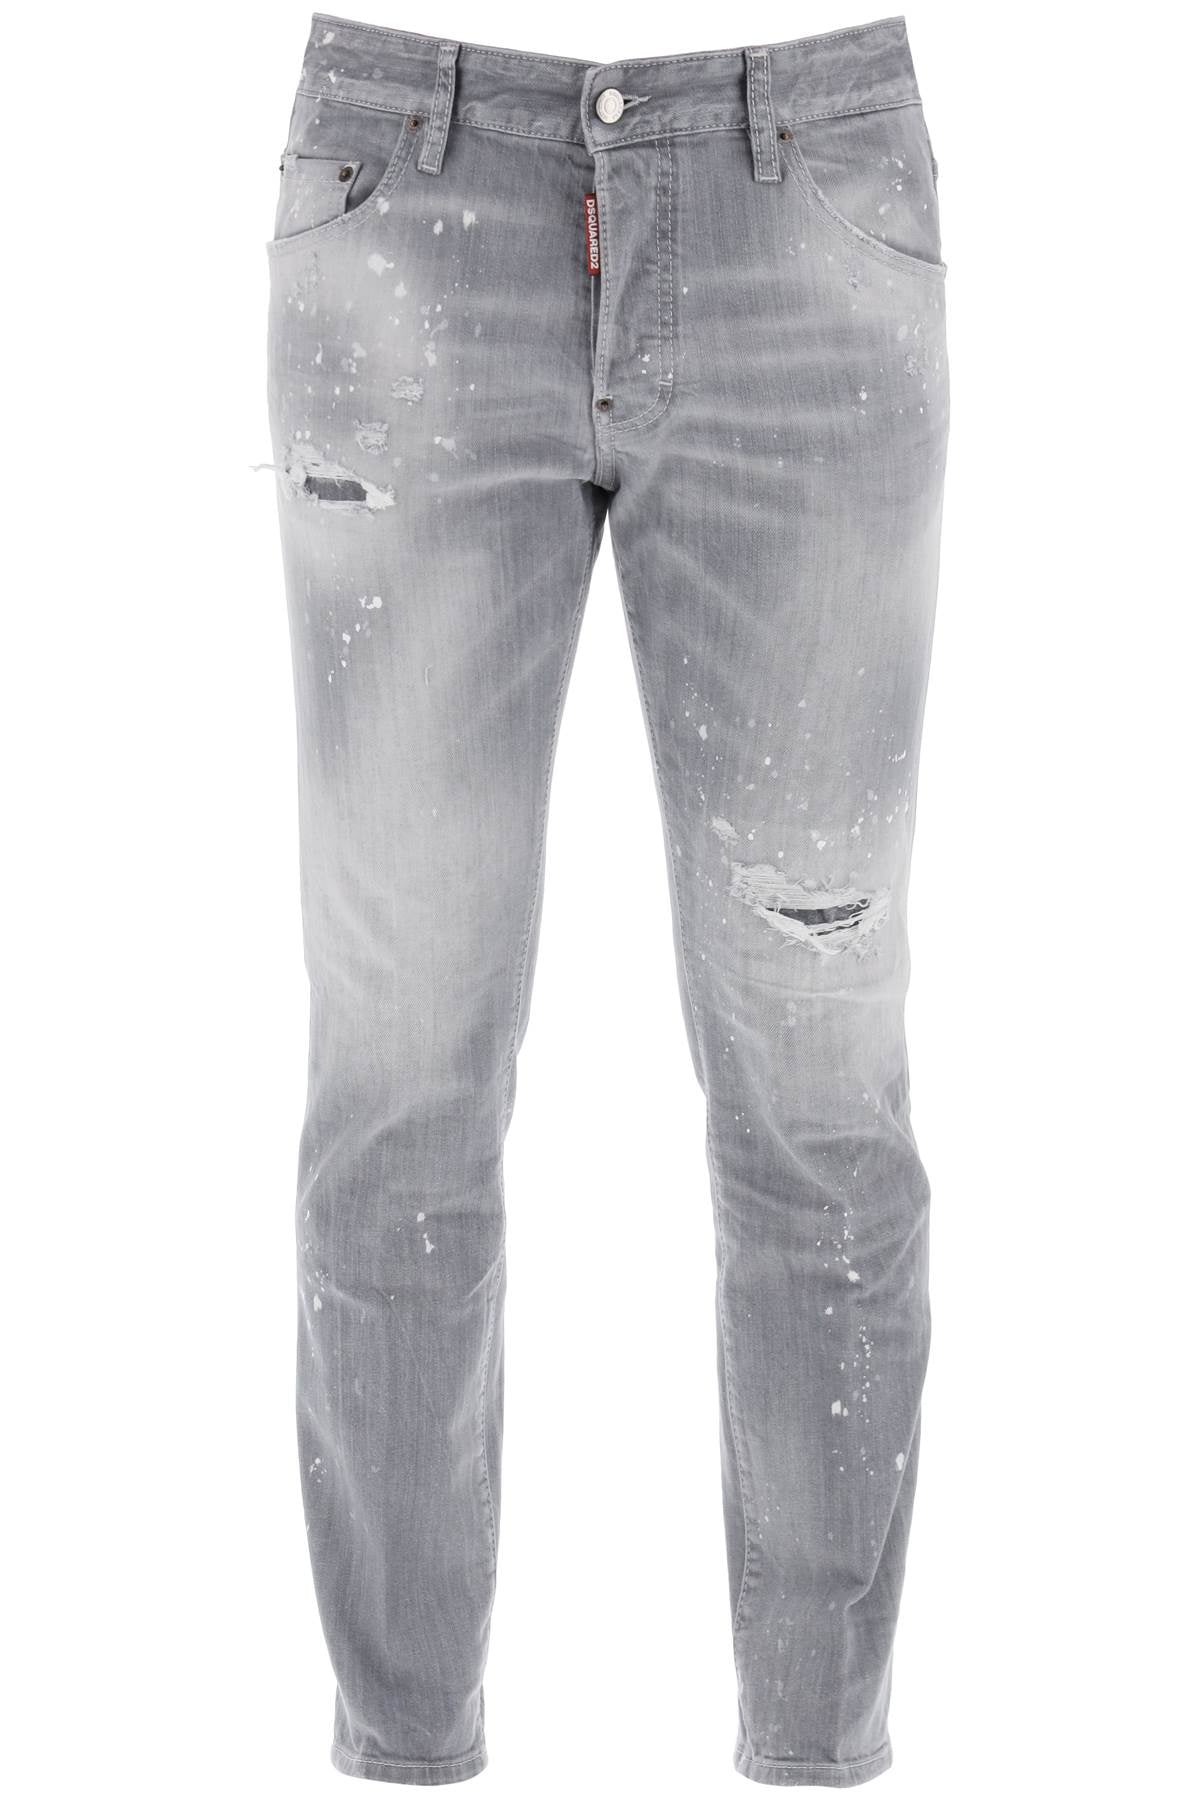 Dsquared2 skater jeans in grey spotted wash-0